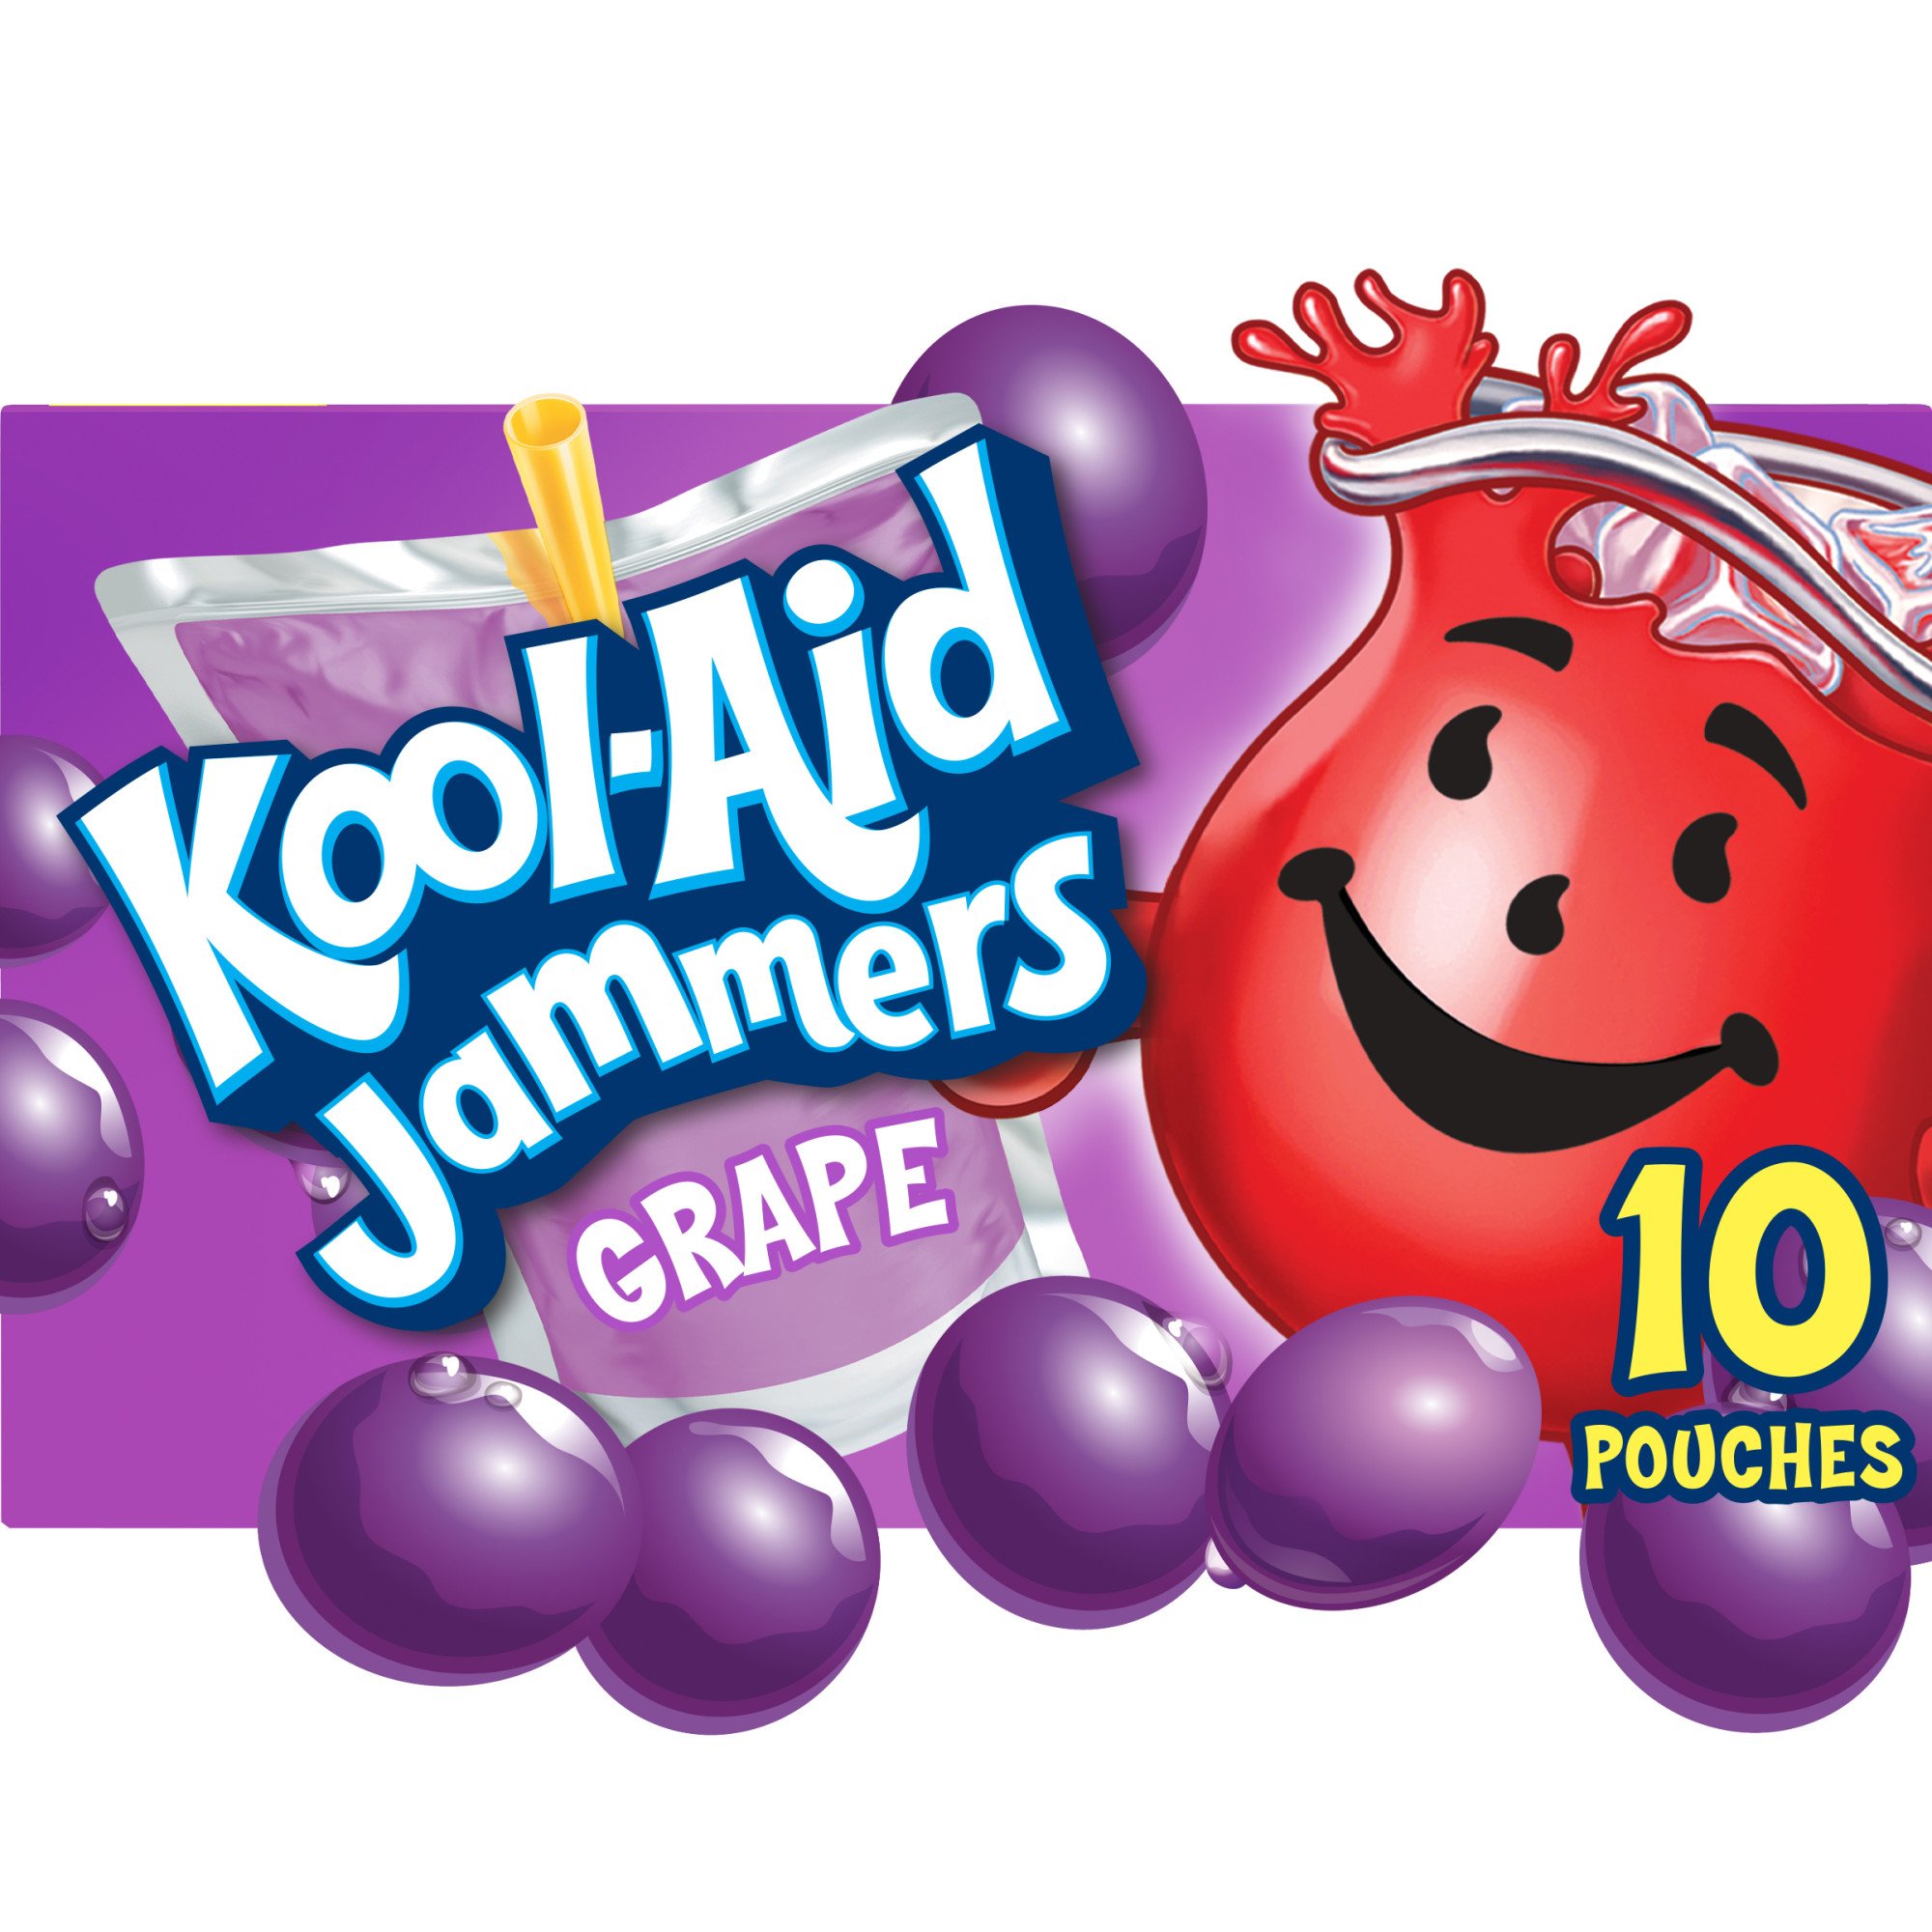 Kool-Aid Jammers Grape Flavored Drink 6 oz Pouches - Shop Juice at H-E-B